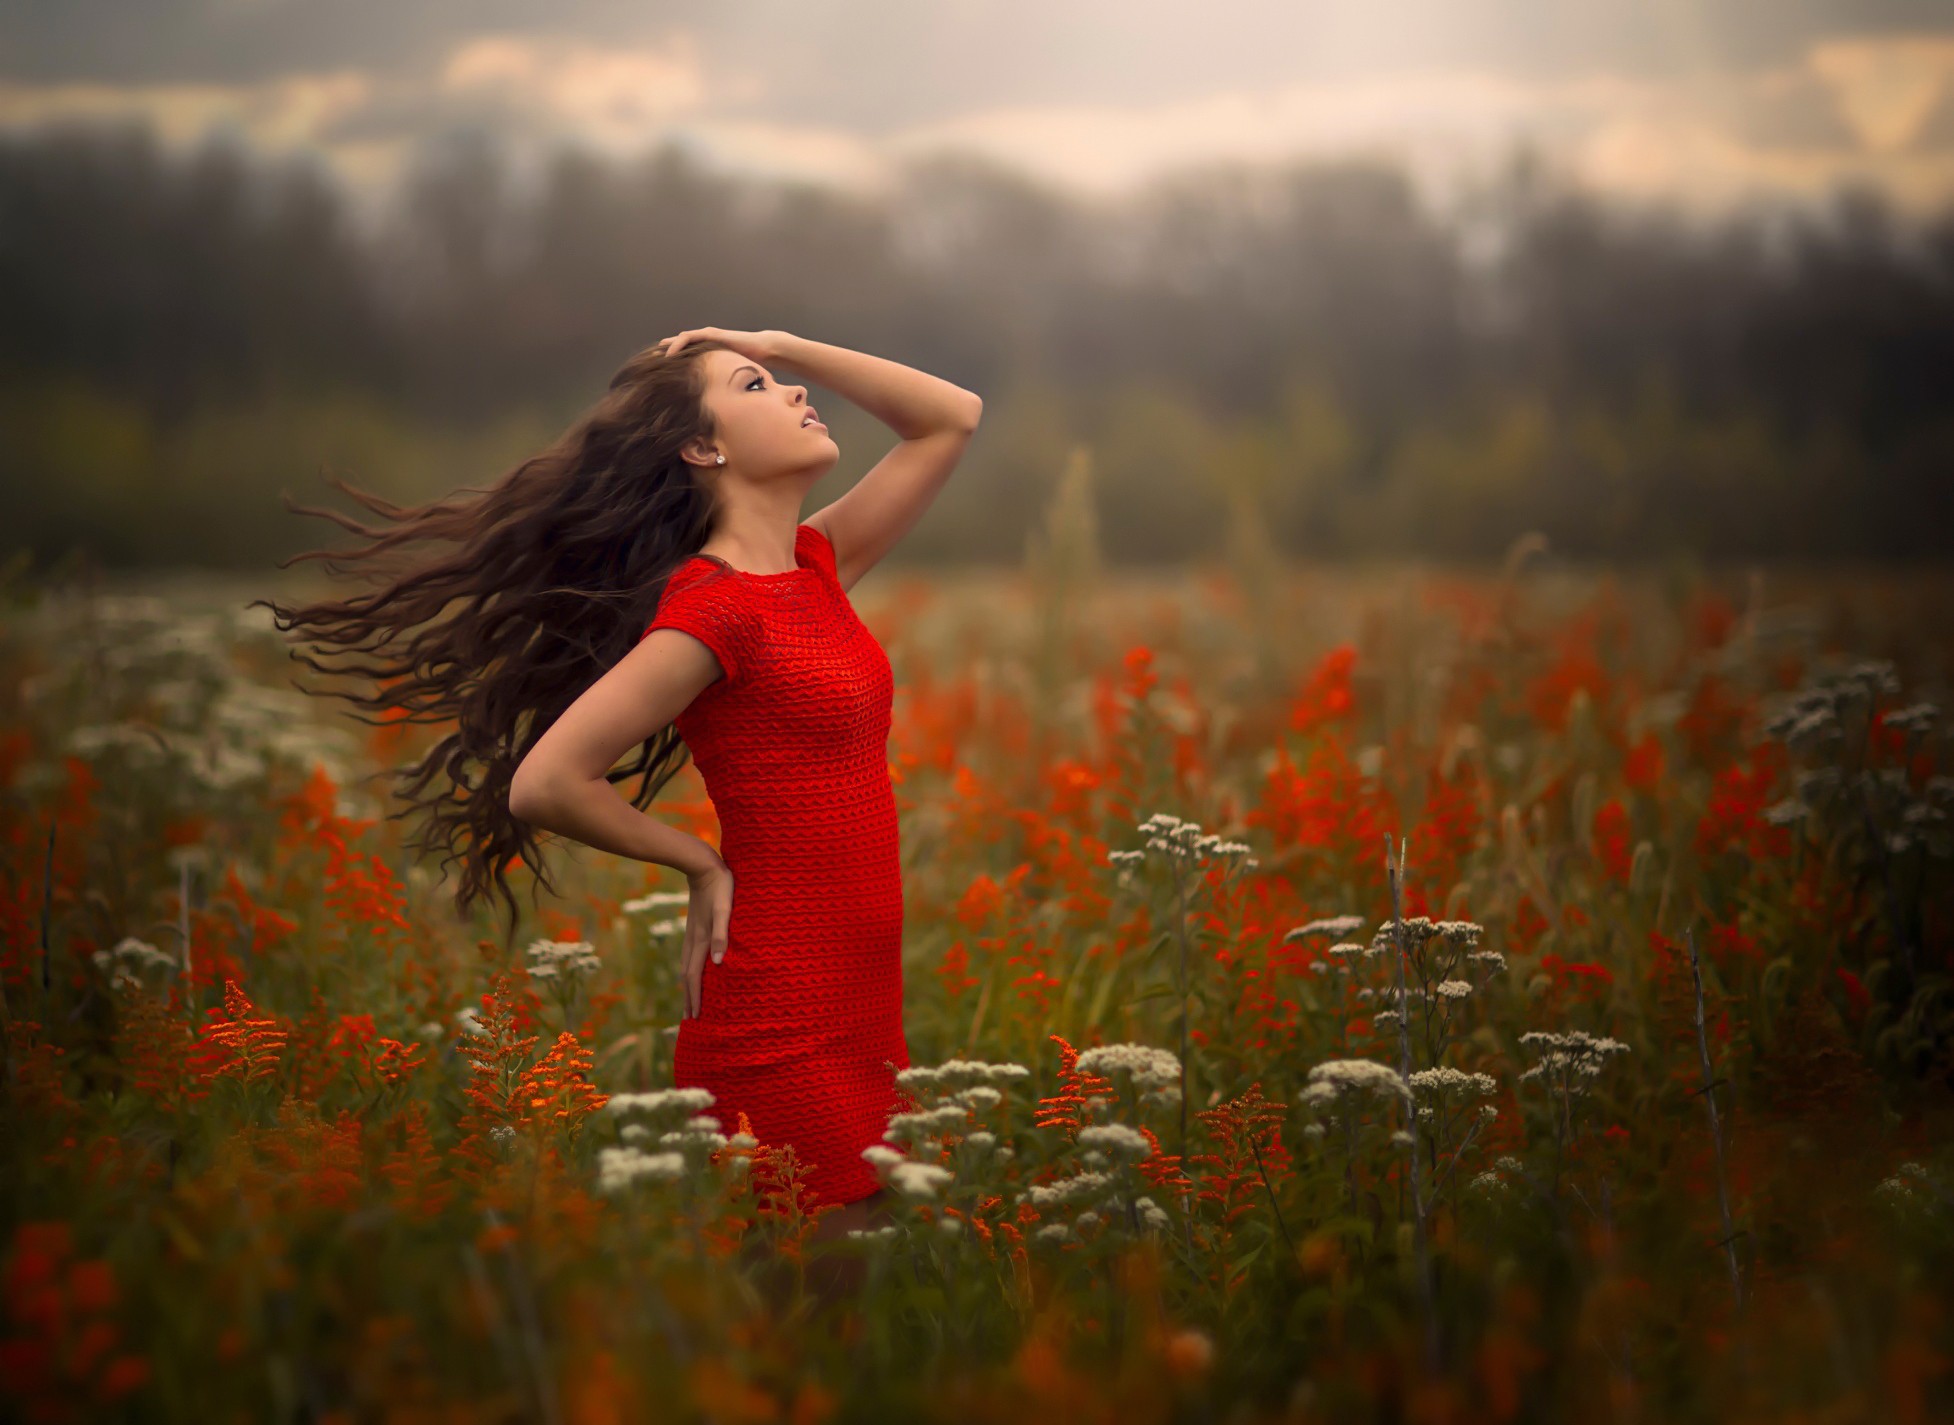 People 1954x1425 women nature women outdoors brunette windy red dress Jake Olson long hair flowers plants field outdoors dress standing looking up red flowers arms up